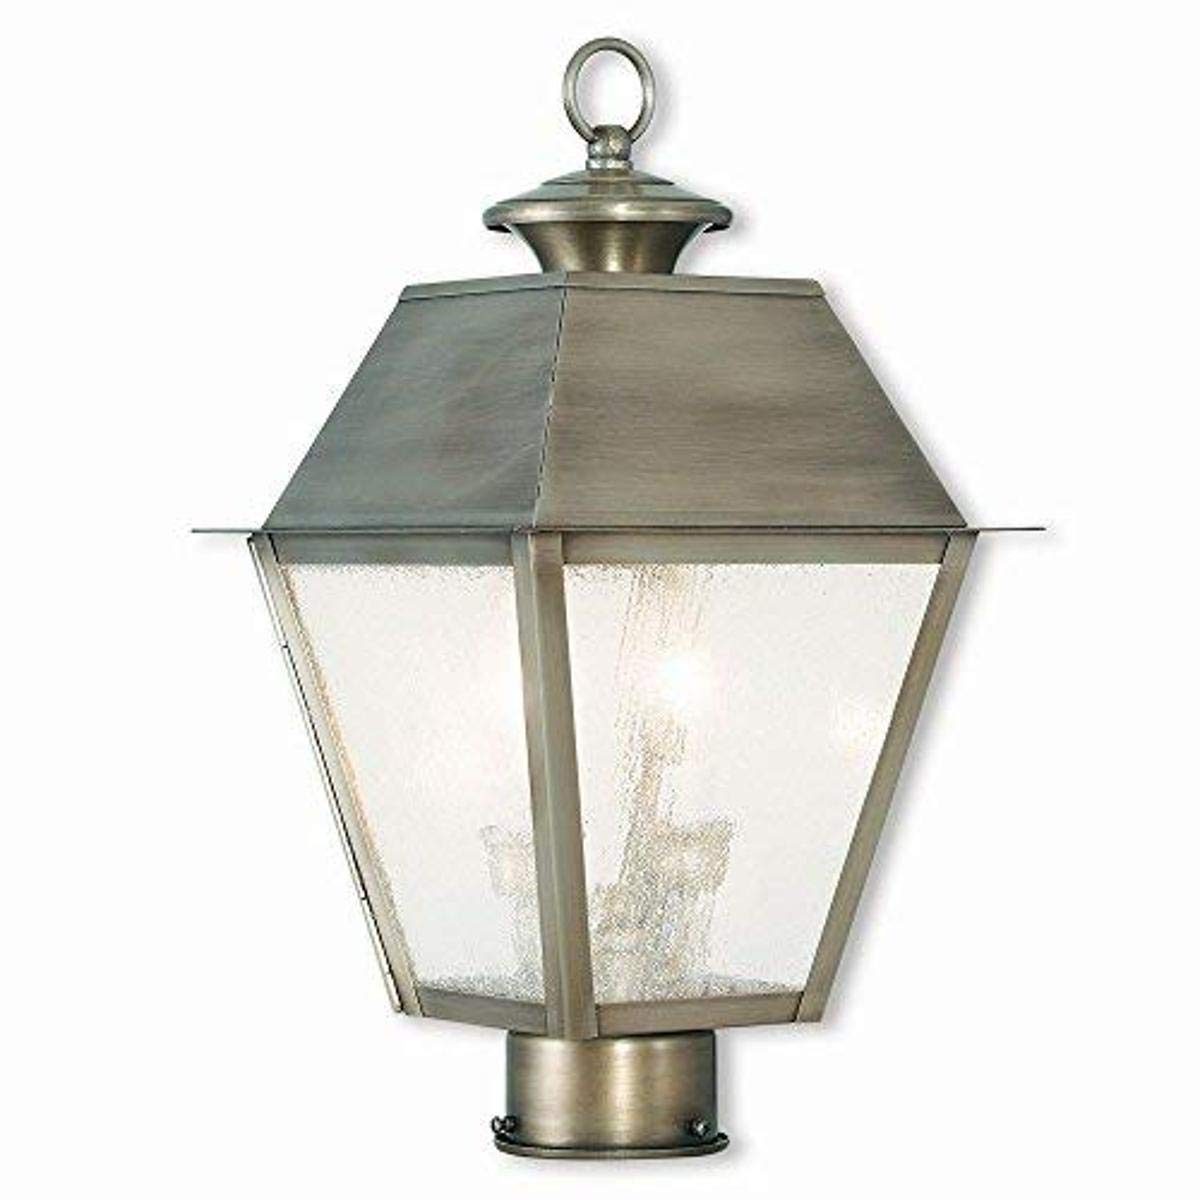 Livex Lighting 2166-29 Transitional Two Light Outdoor Post Lantern from Mansfield Collection in Pwt, Nckl, B/S, Slvr. Finish, 9.00 inches, 16.50x9.00x9.00, Vintage Pewter